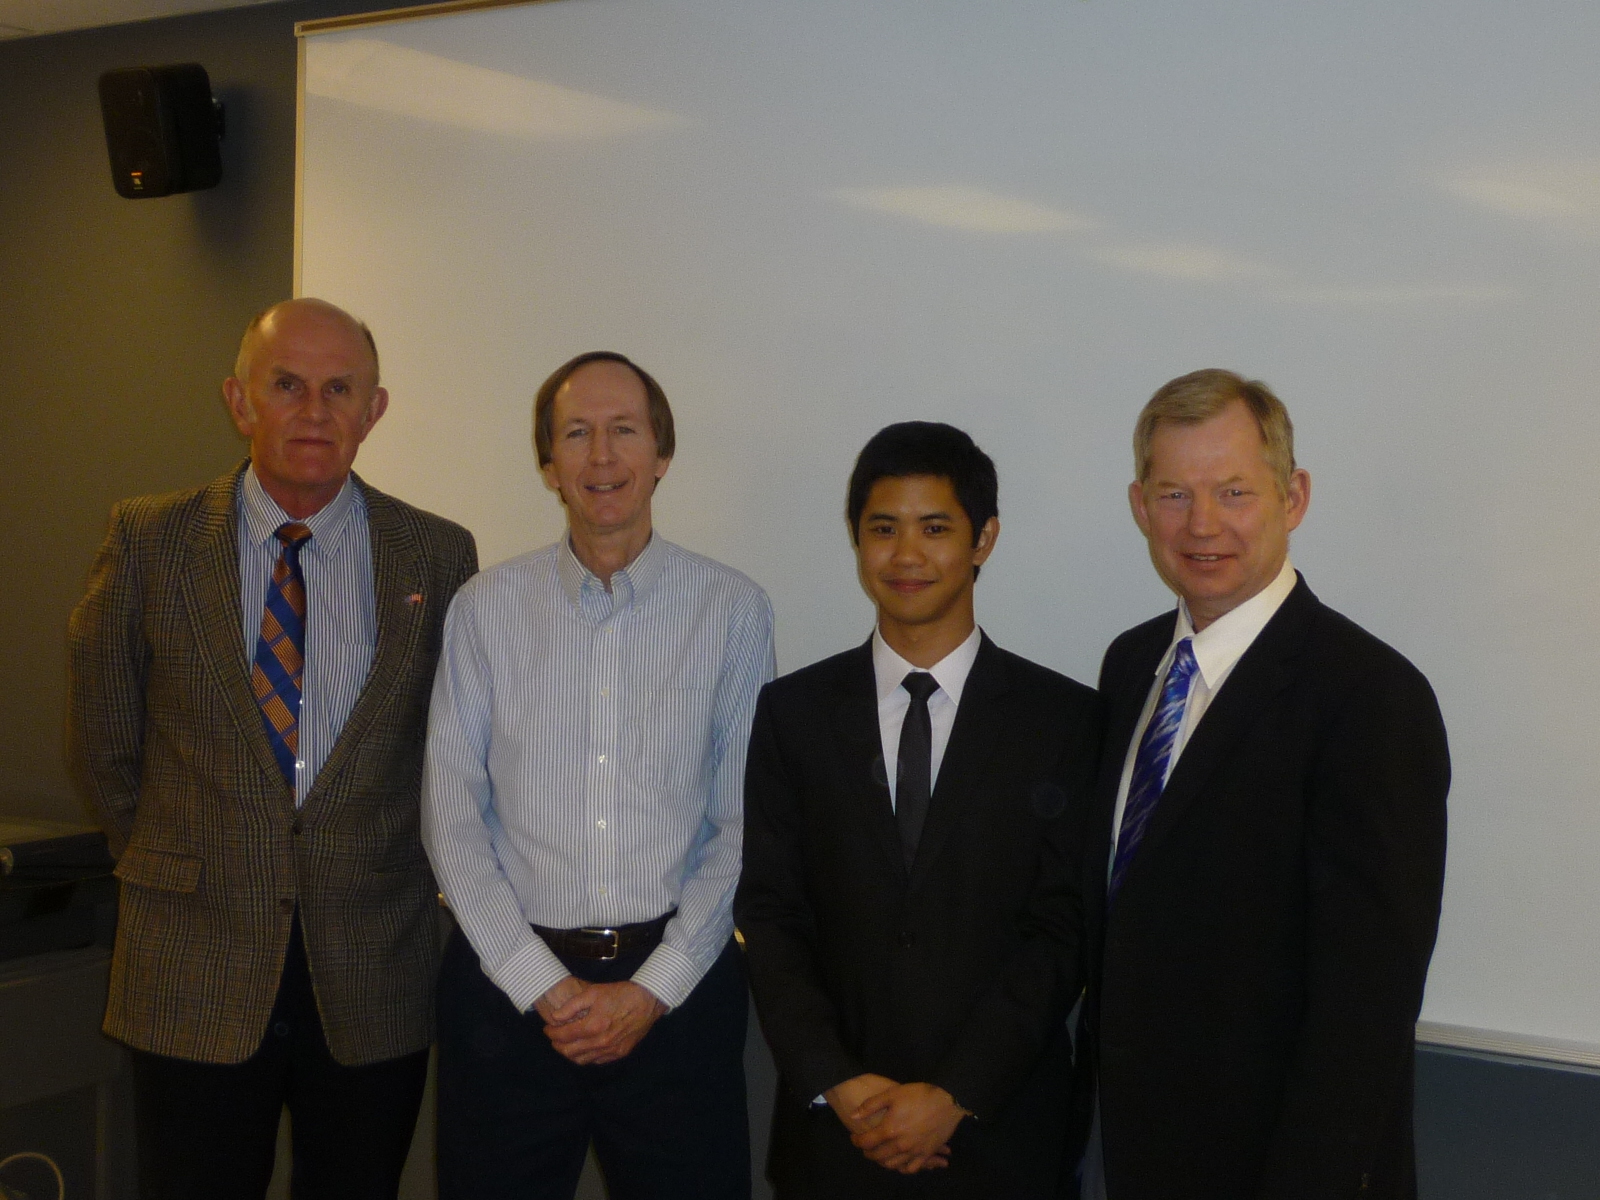 Diego with his Master's thesis committee after his successful defense on April 17.